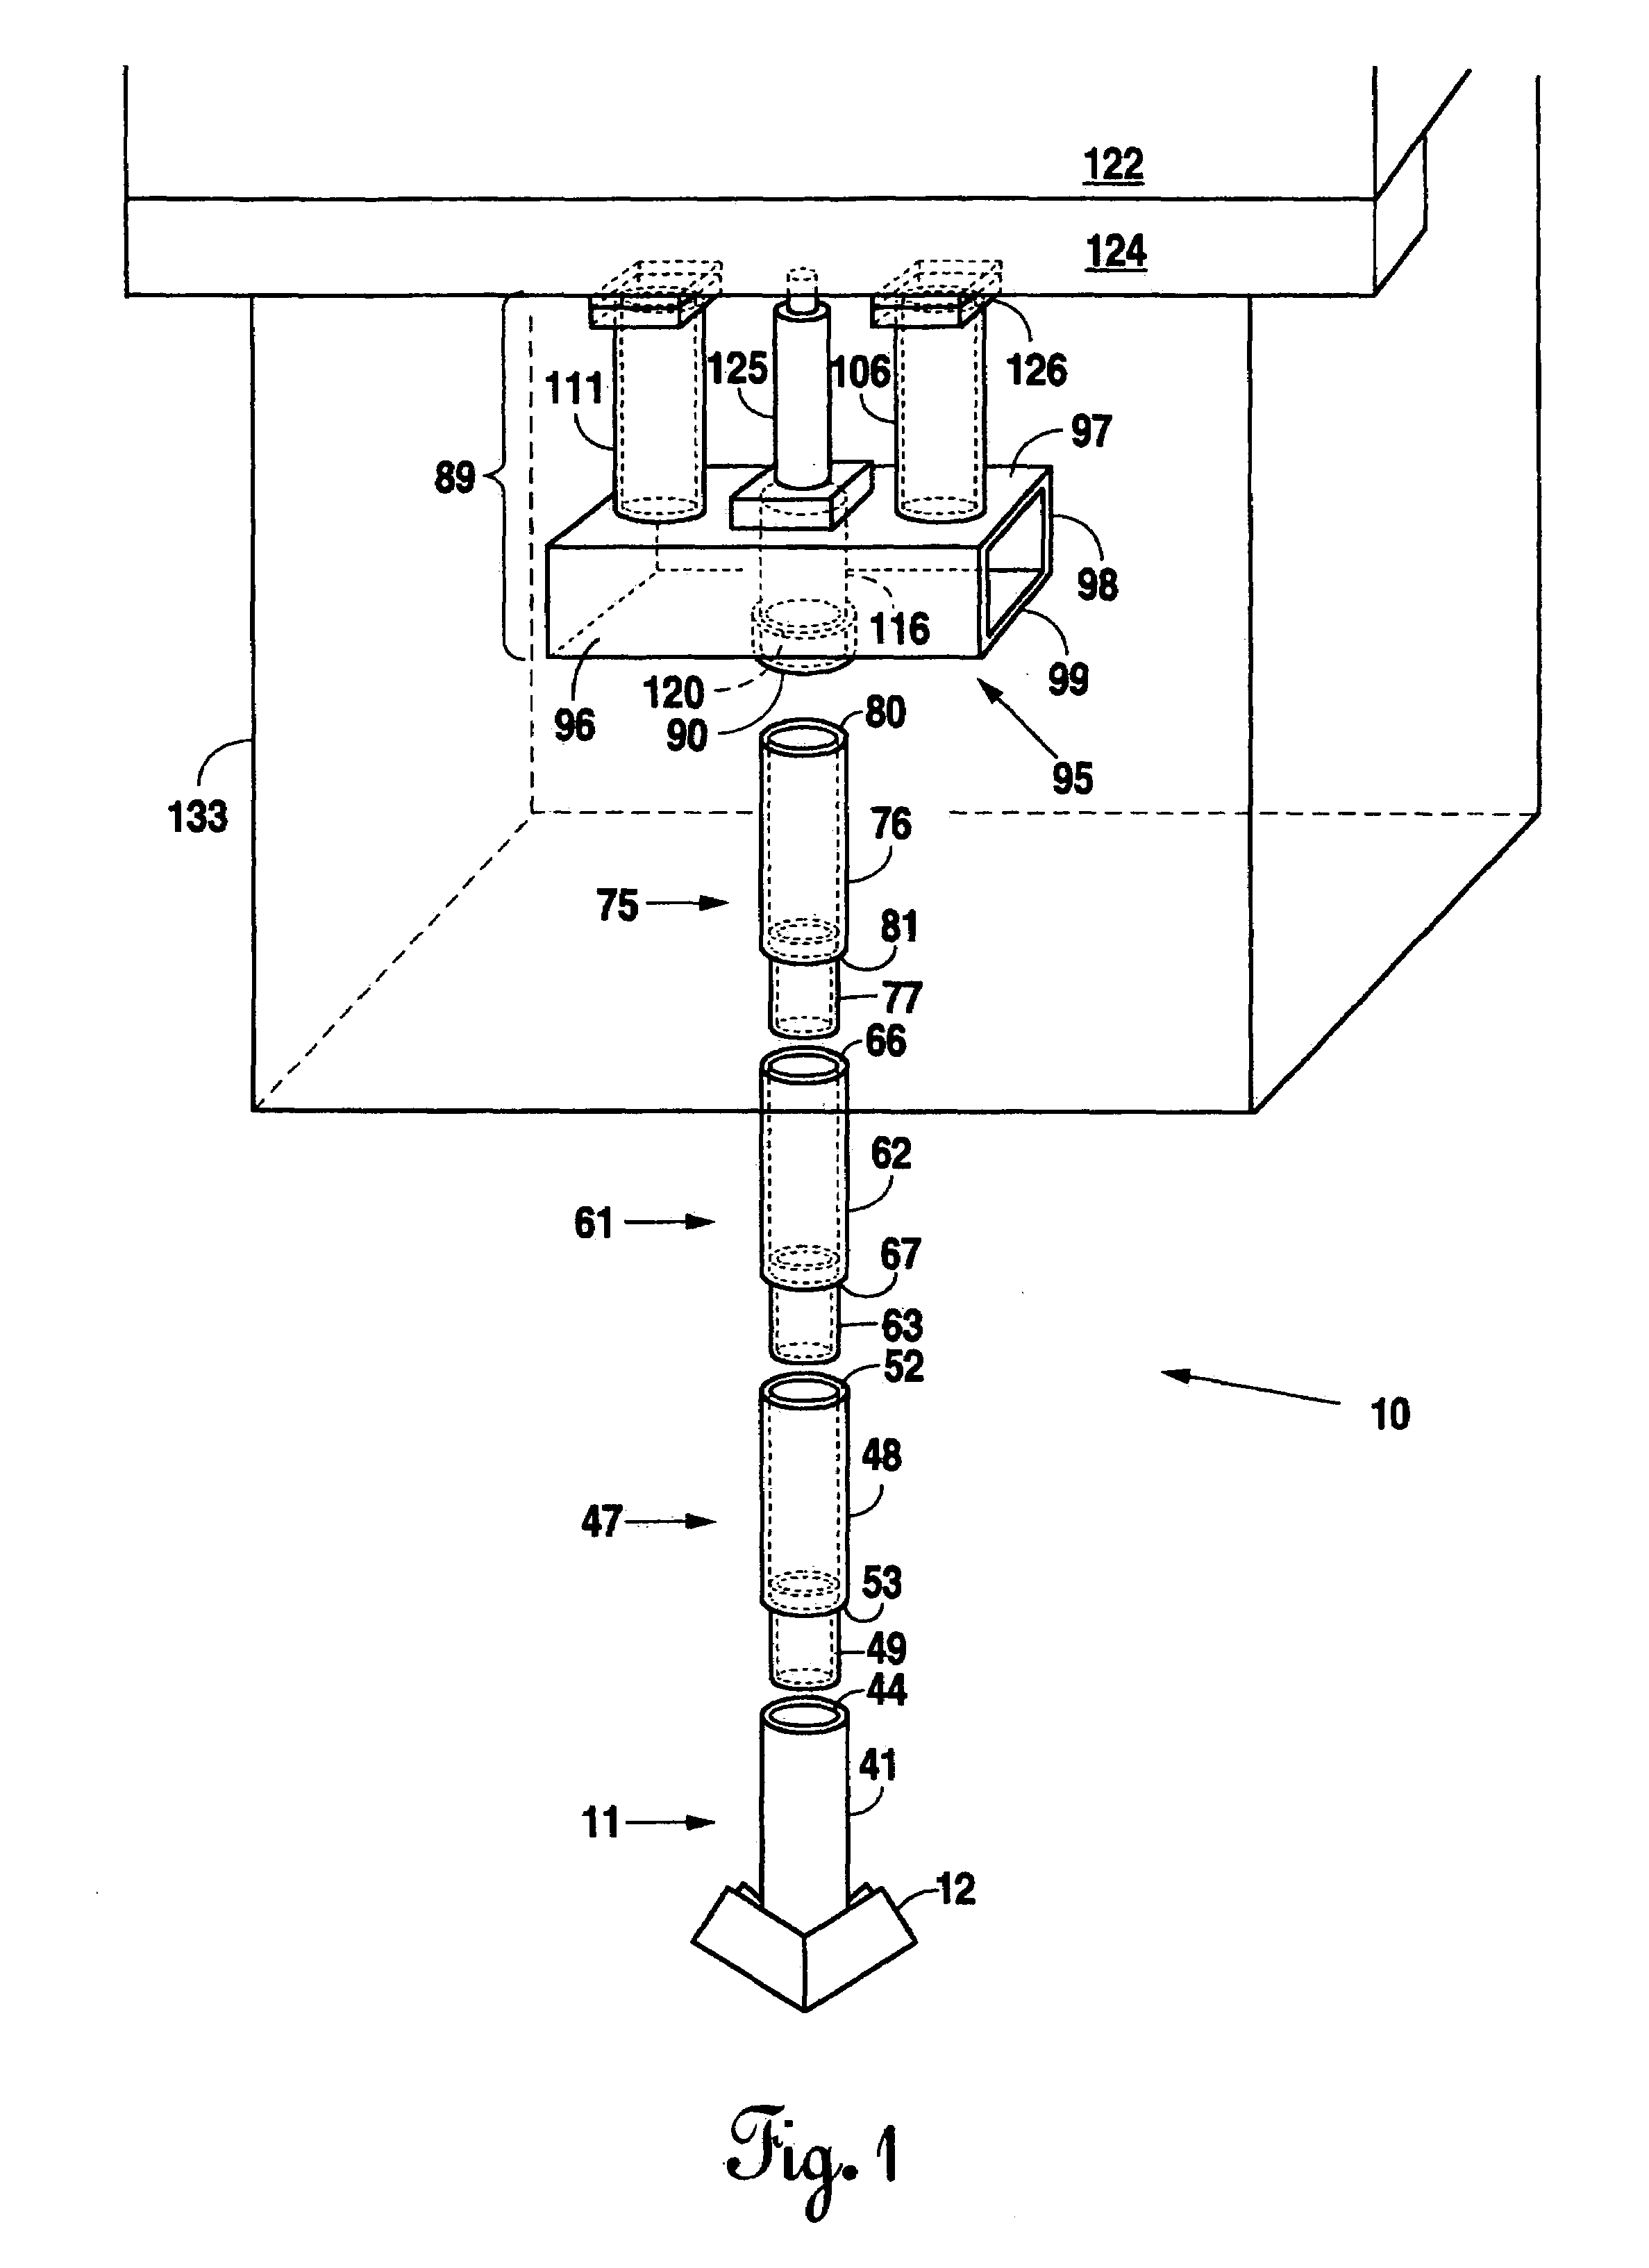 Method and apparatus for raising, leveling, and supporting displaced foundation allowing for readjustment after installation